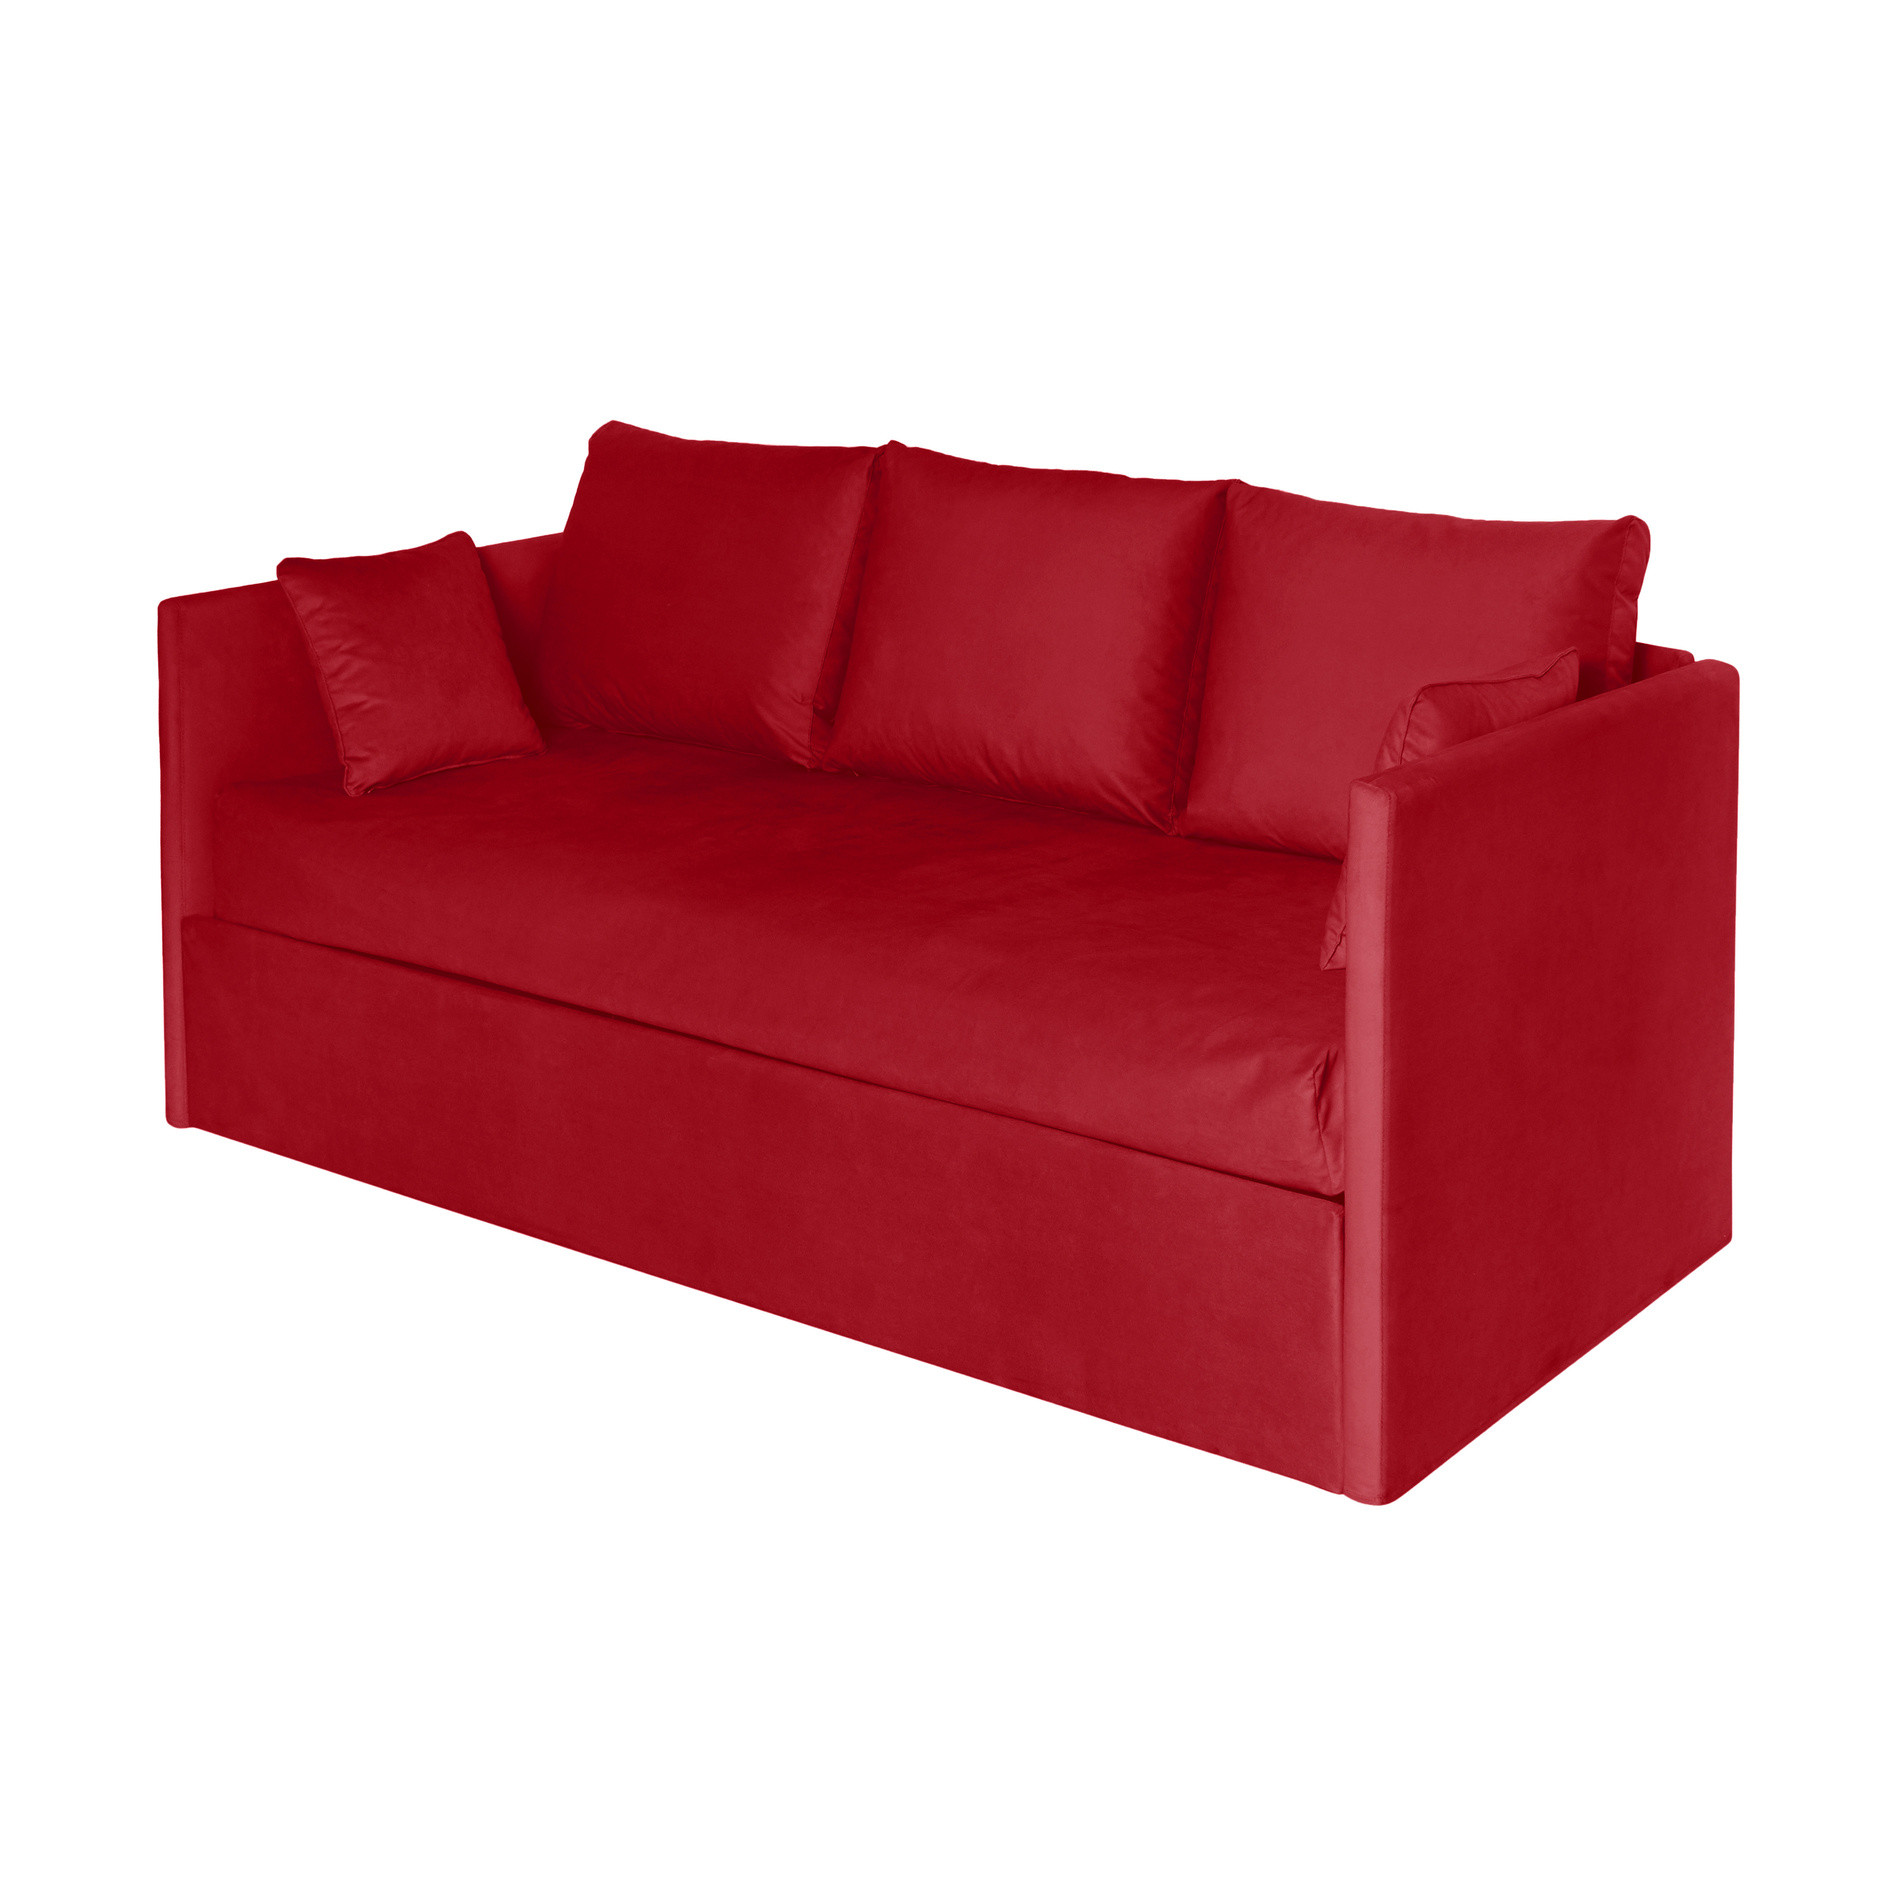 Multi sofa bed, Red, large image number 0